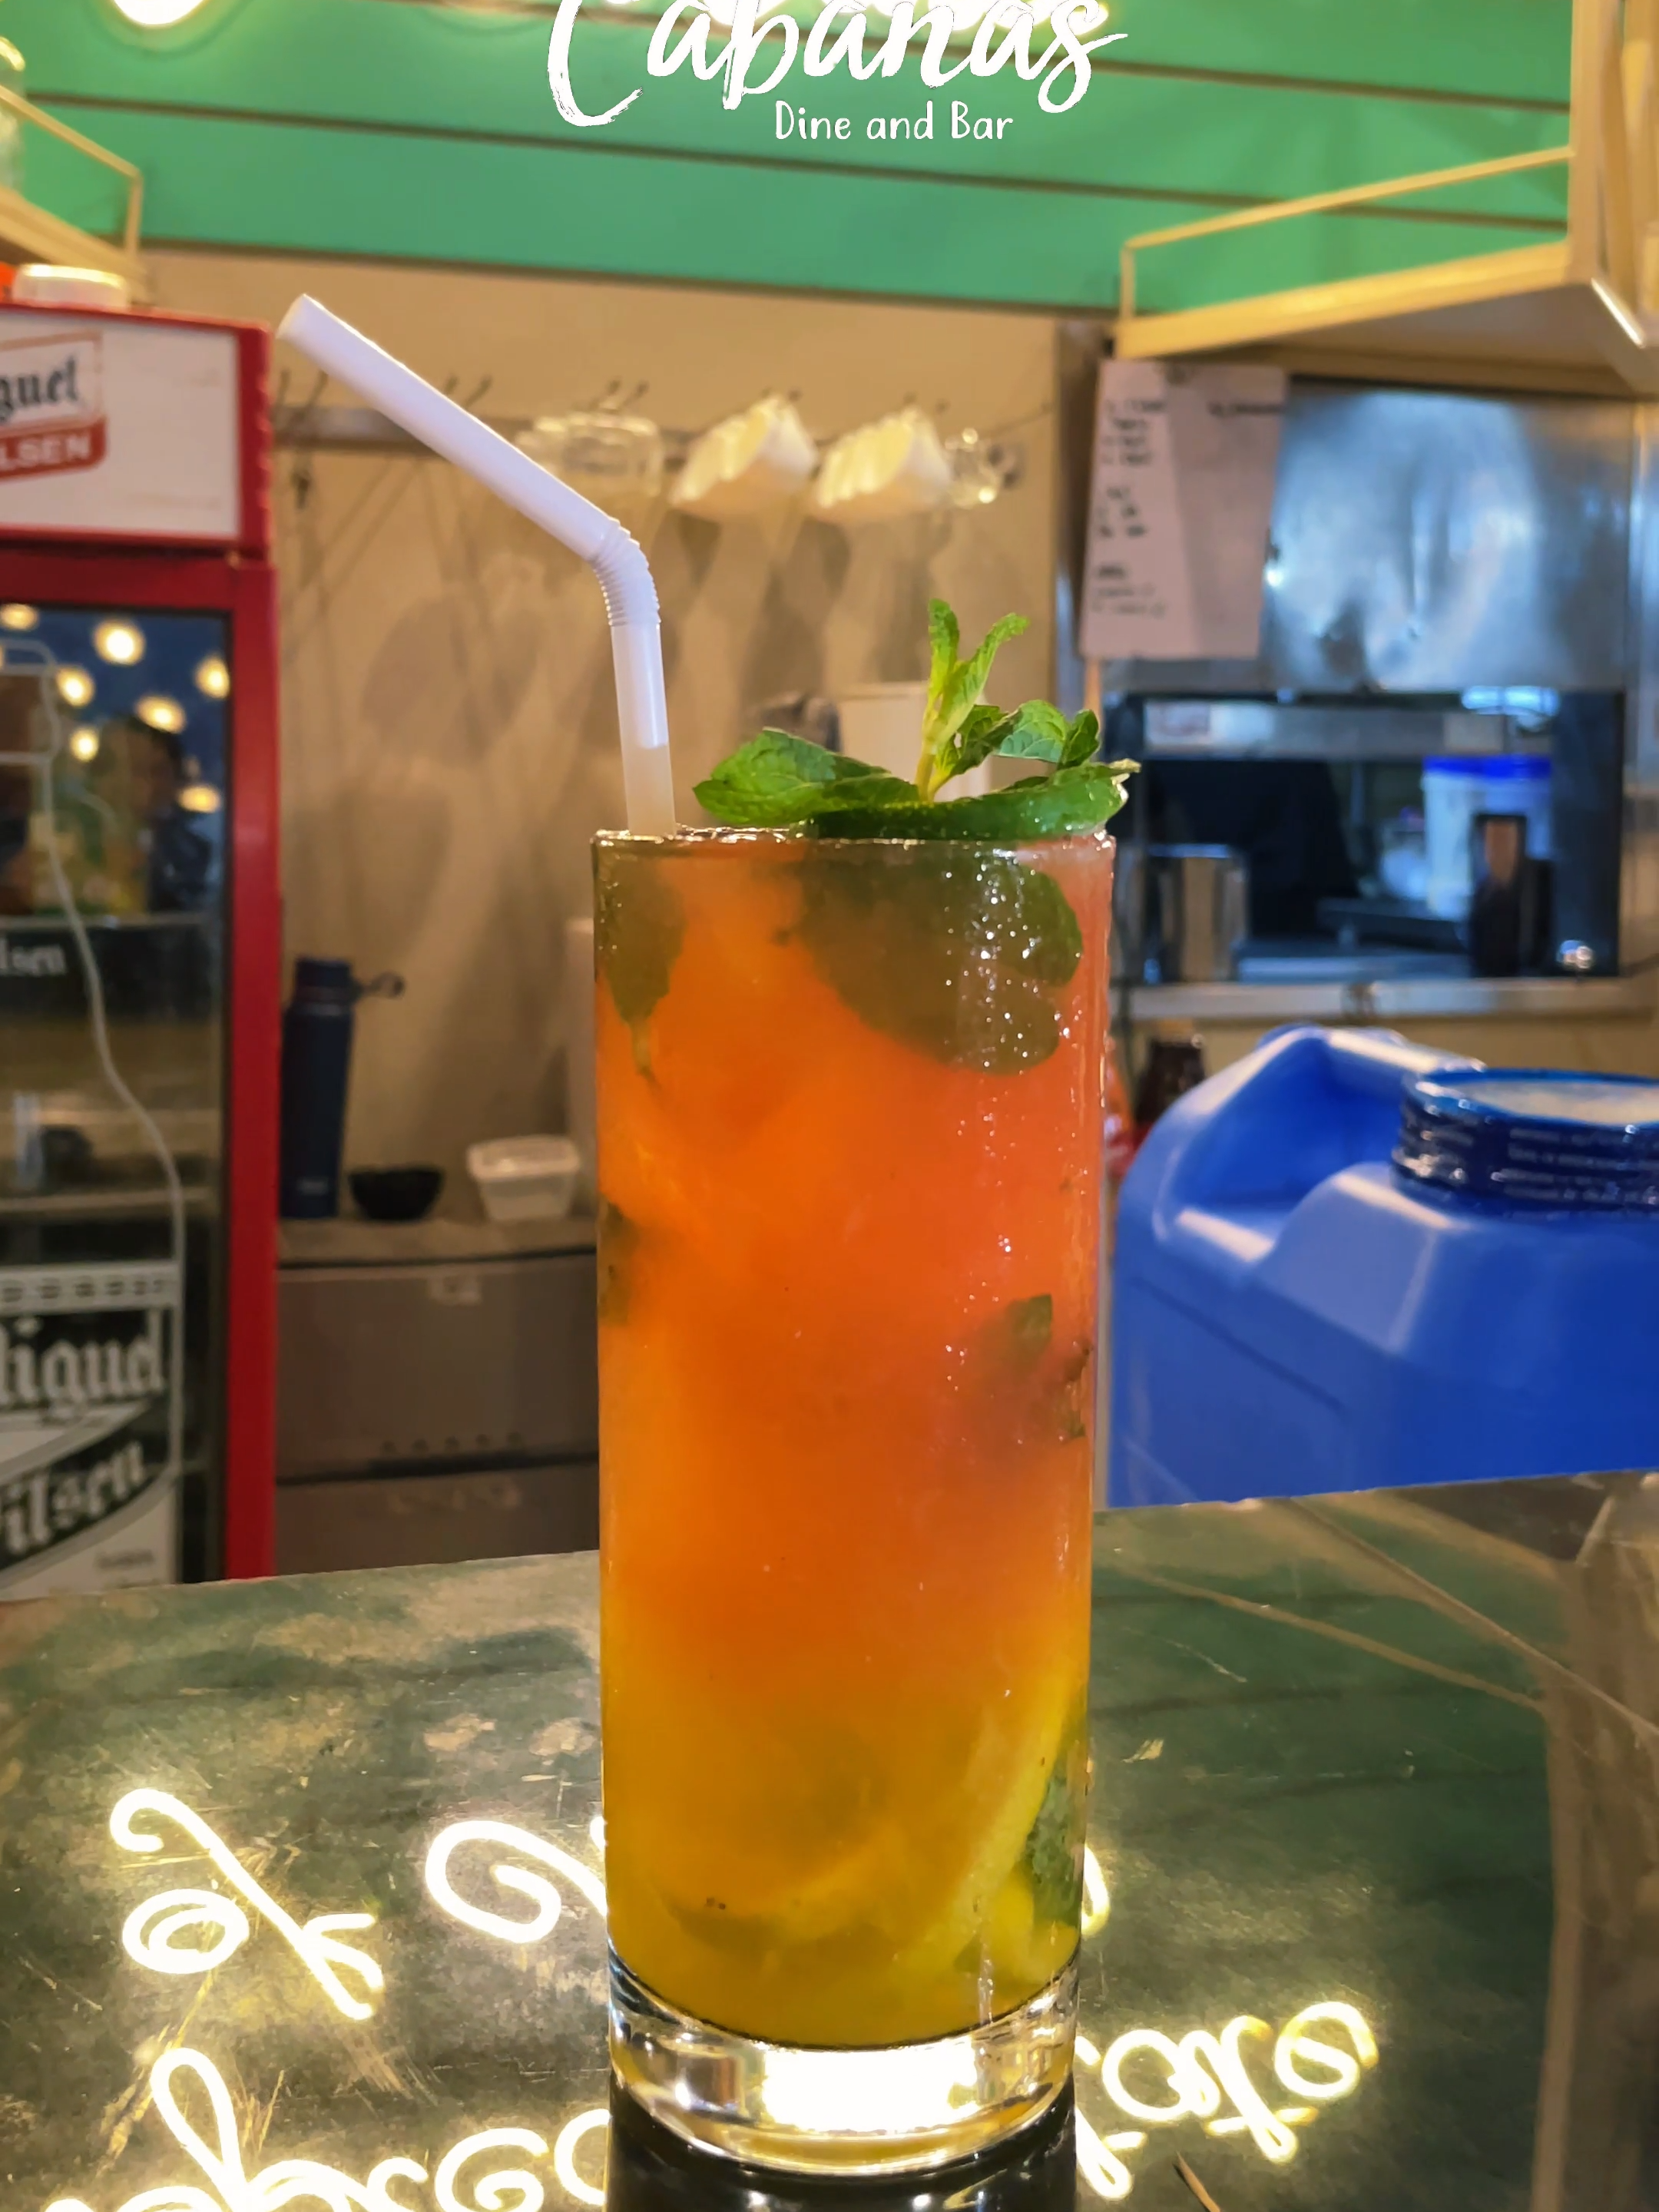 Sip, savor, and stay cool with our refreshing coolers!